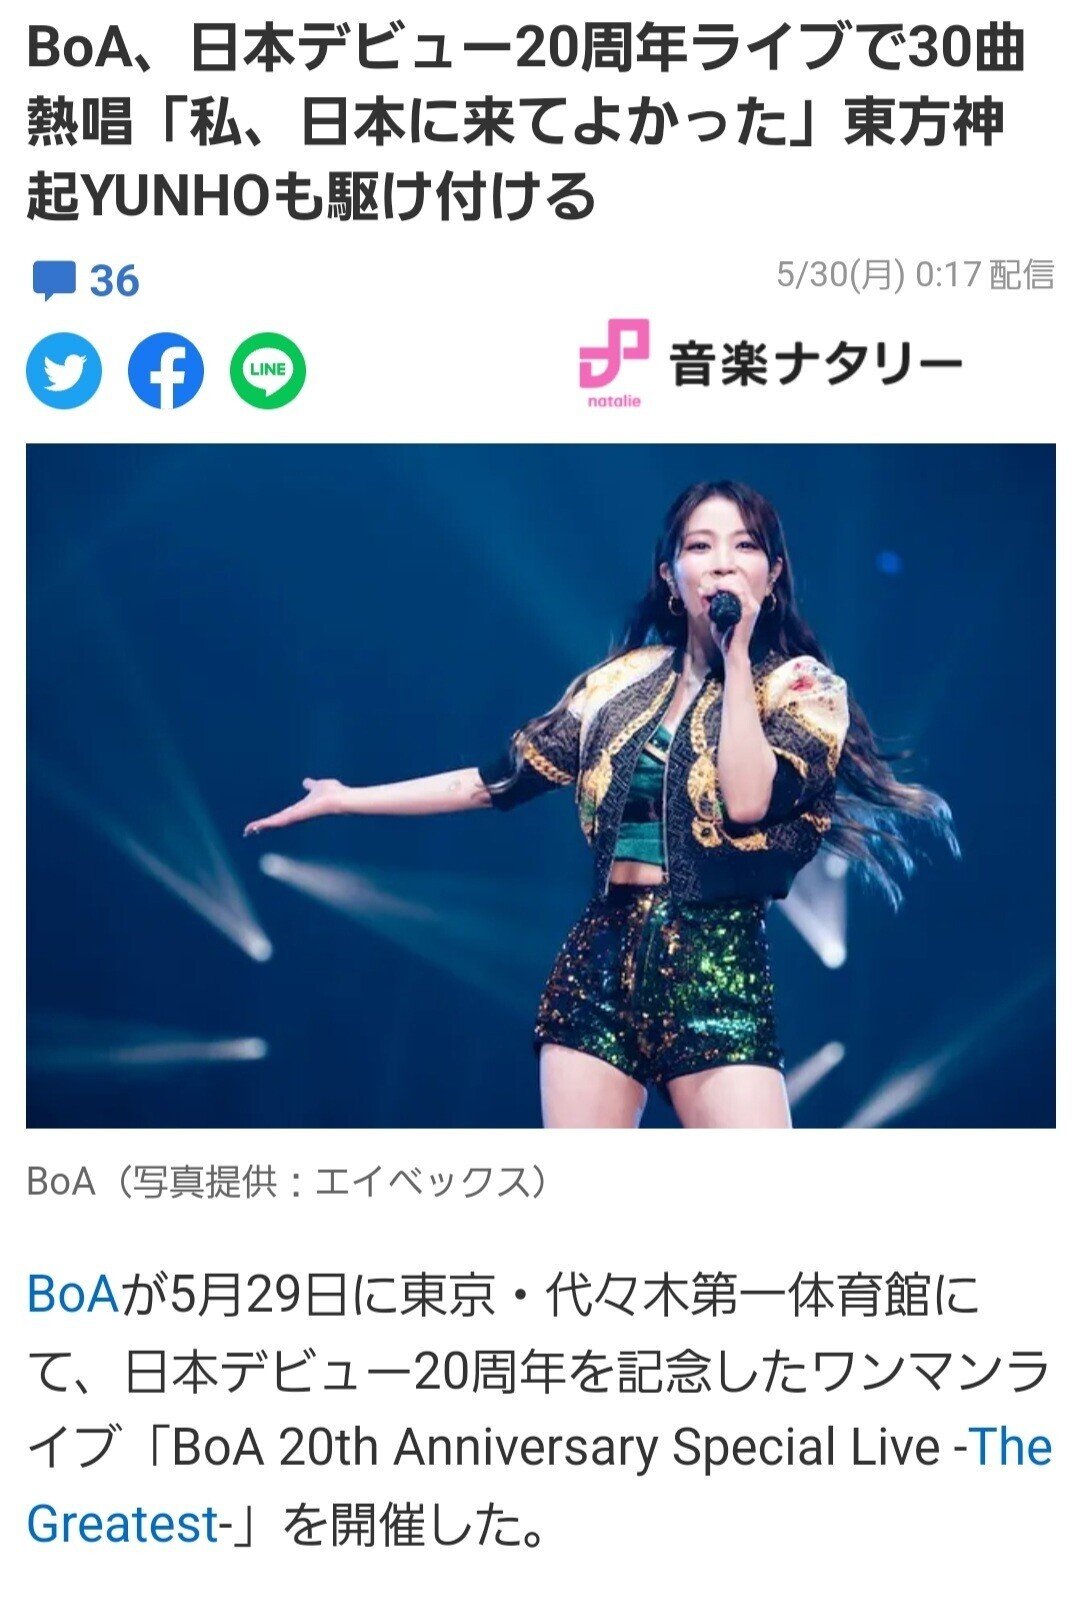 BoA 20周年Special Live プレミアムグッズ